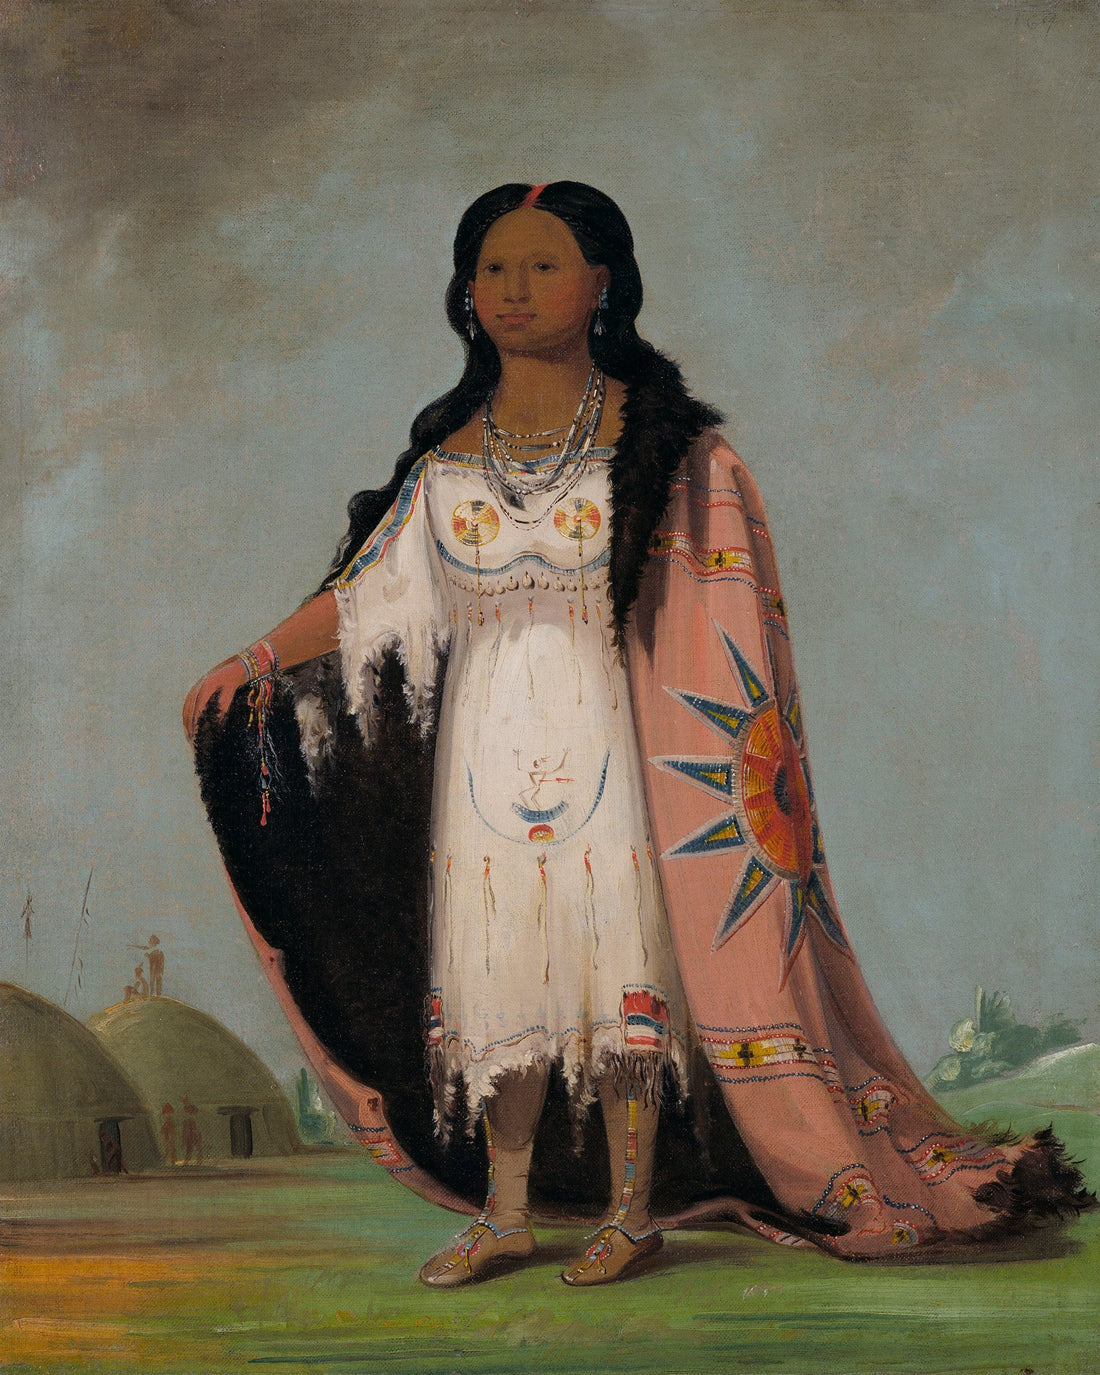 Daughter of an Indian Chief